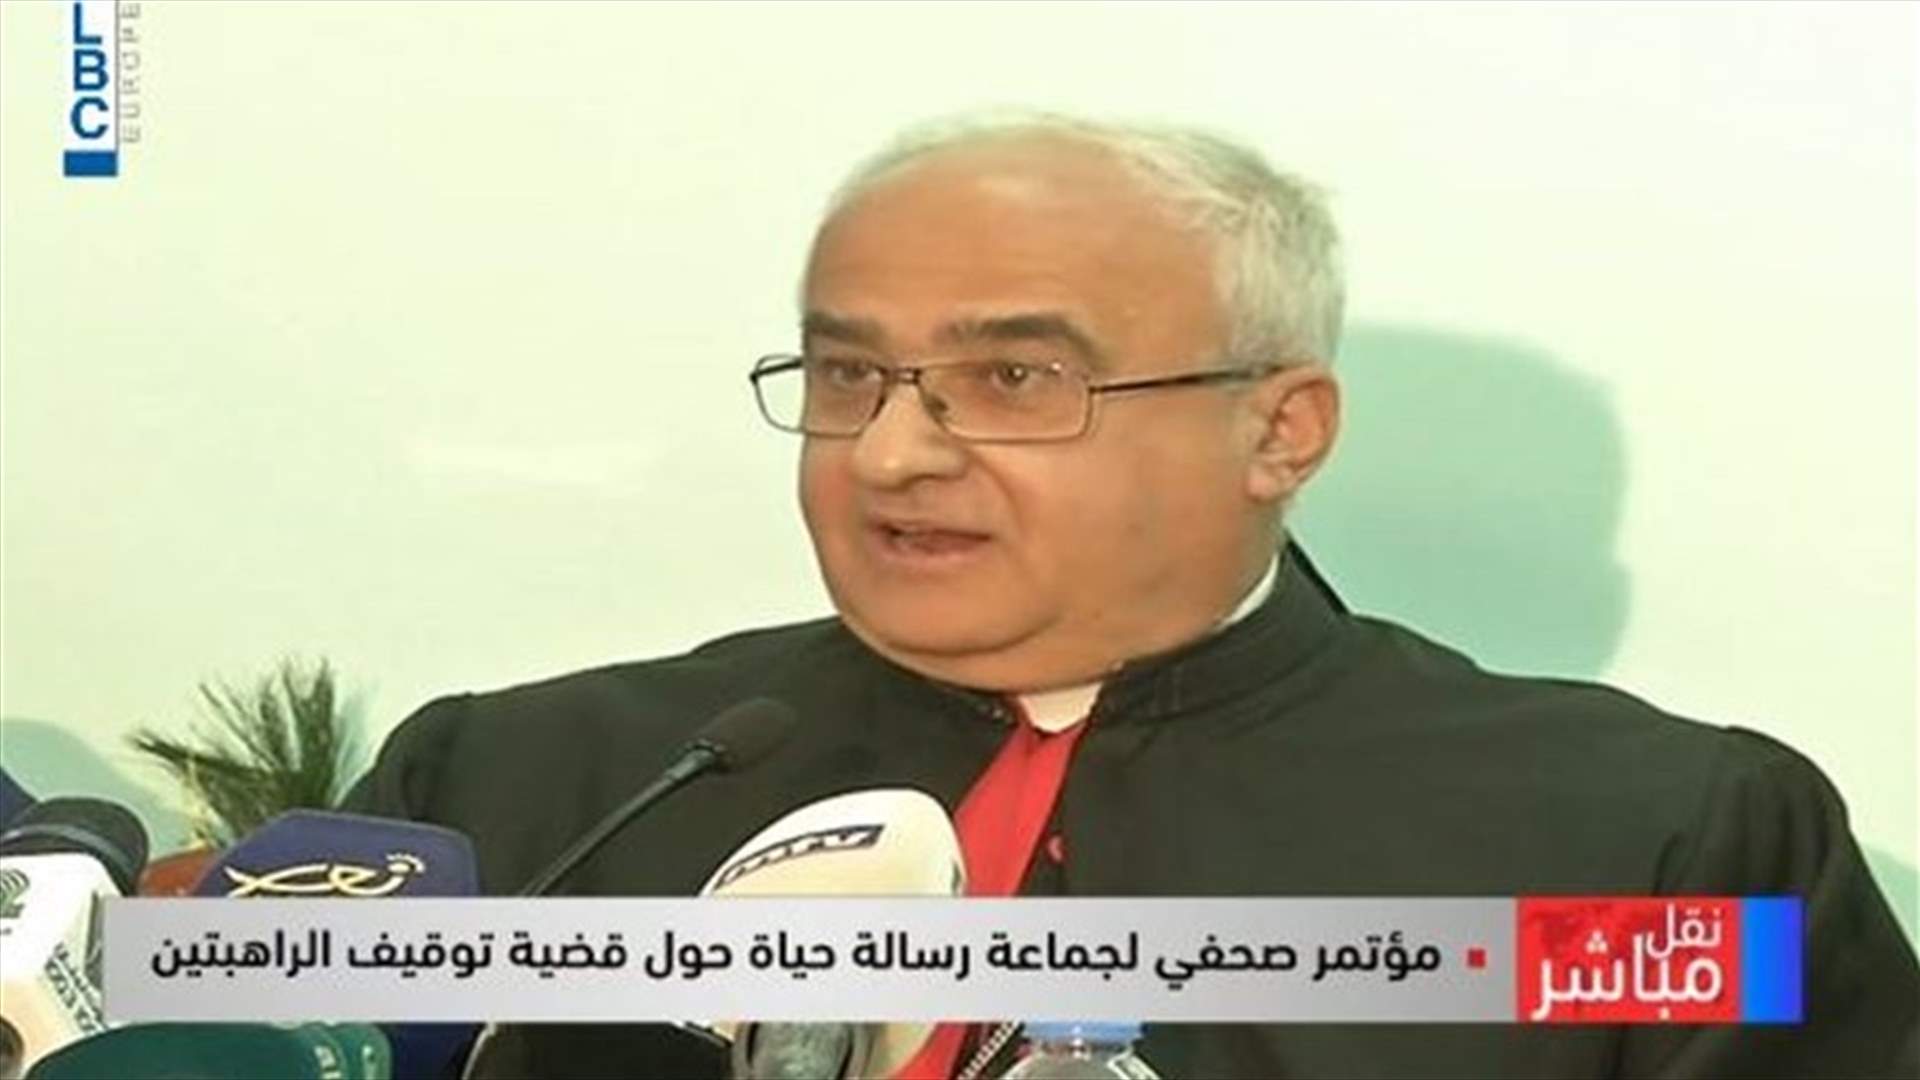 Bishop Hanna Alwan: Spreading inaccurate news is not acceptable